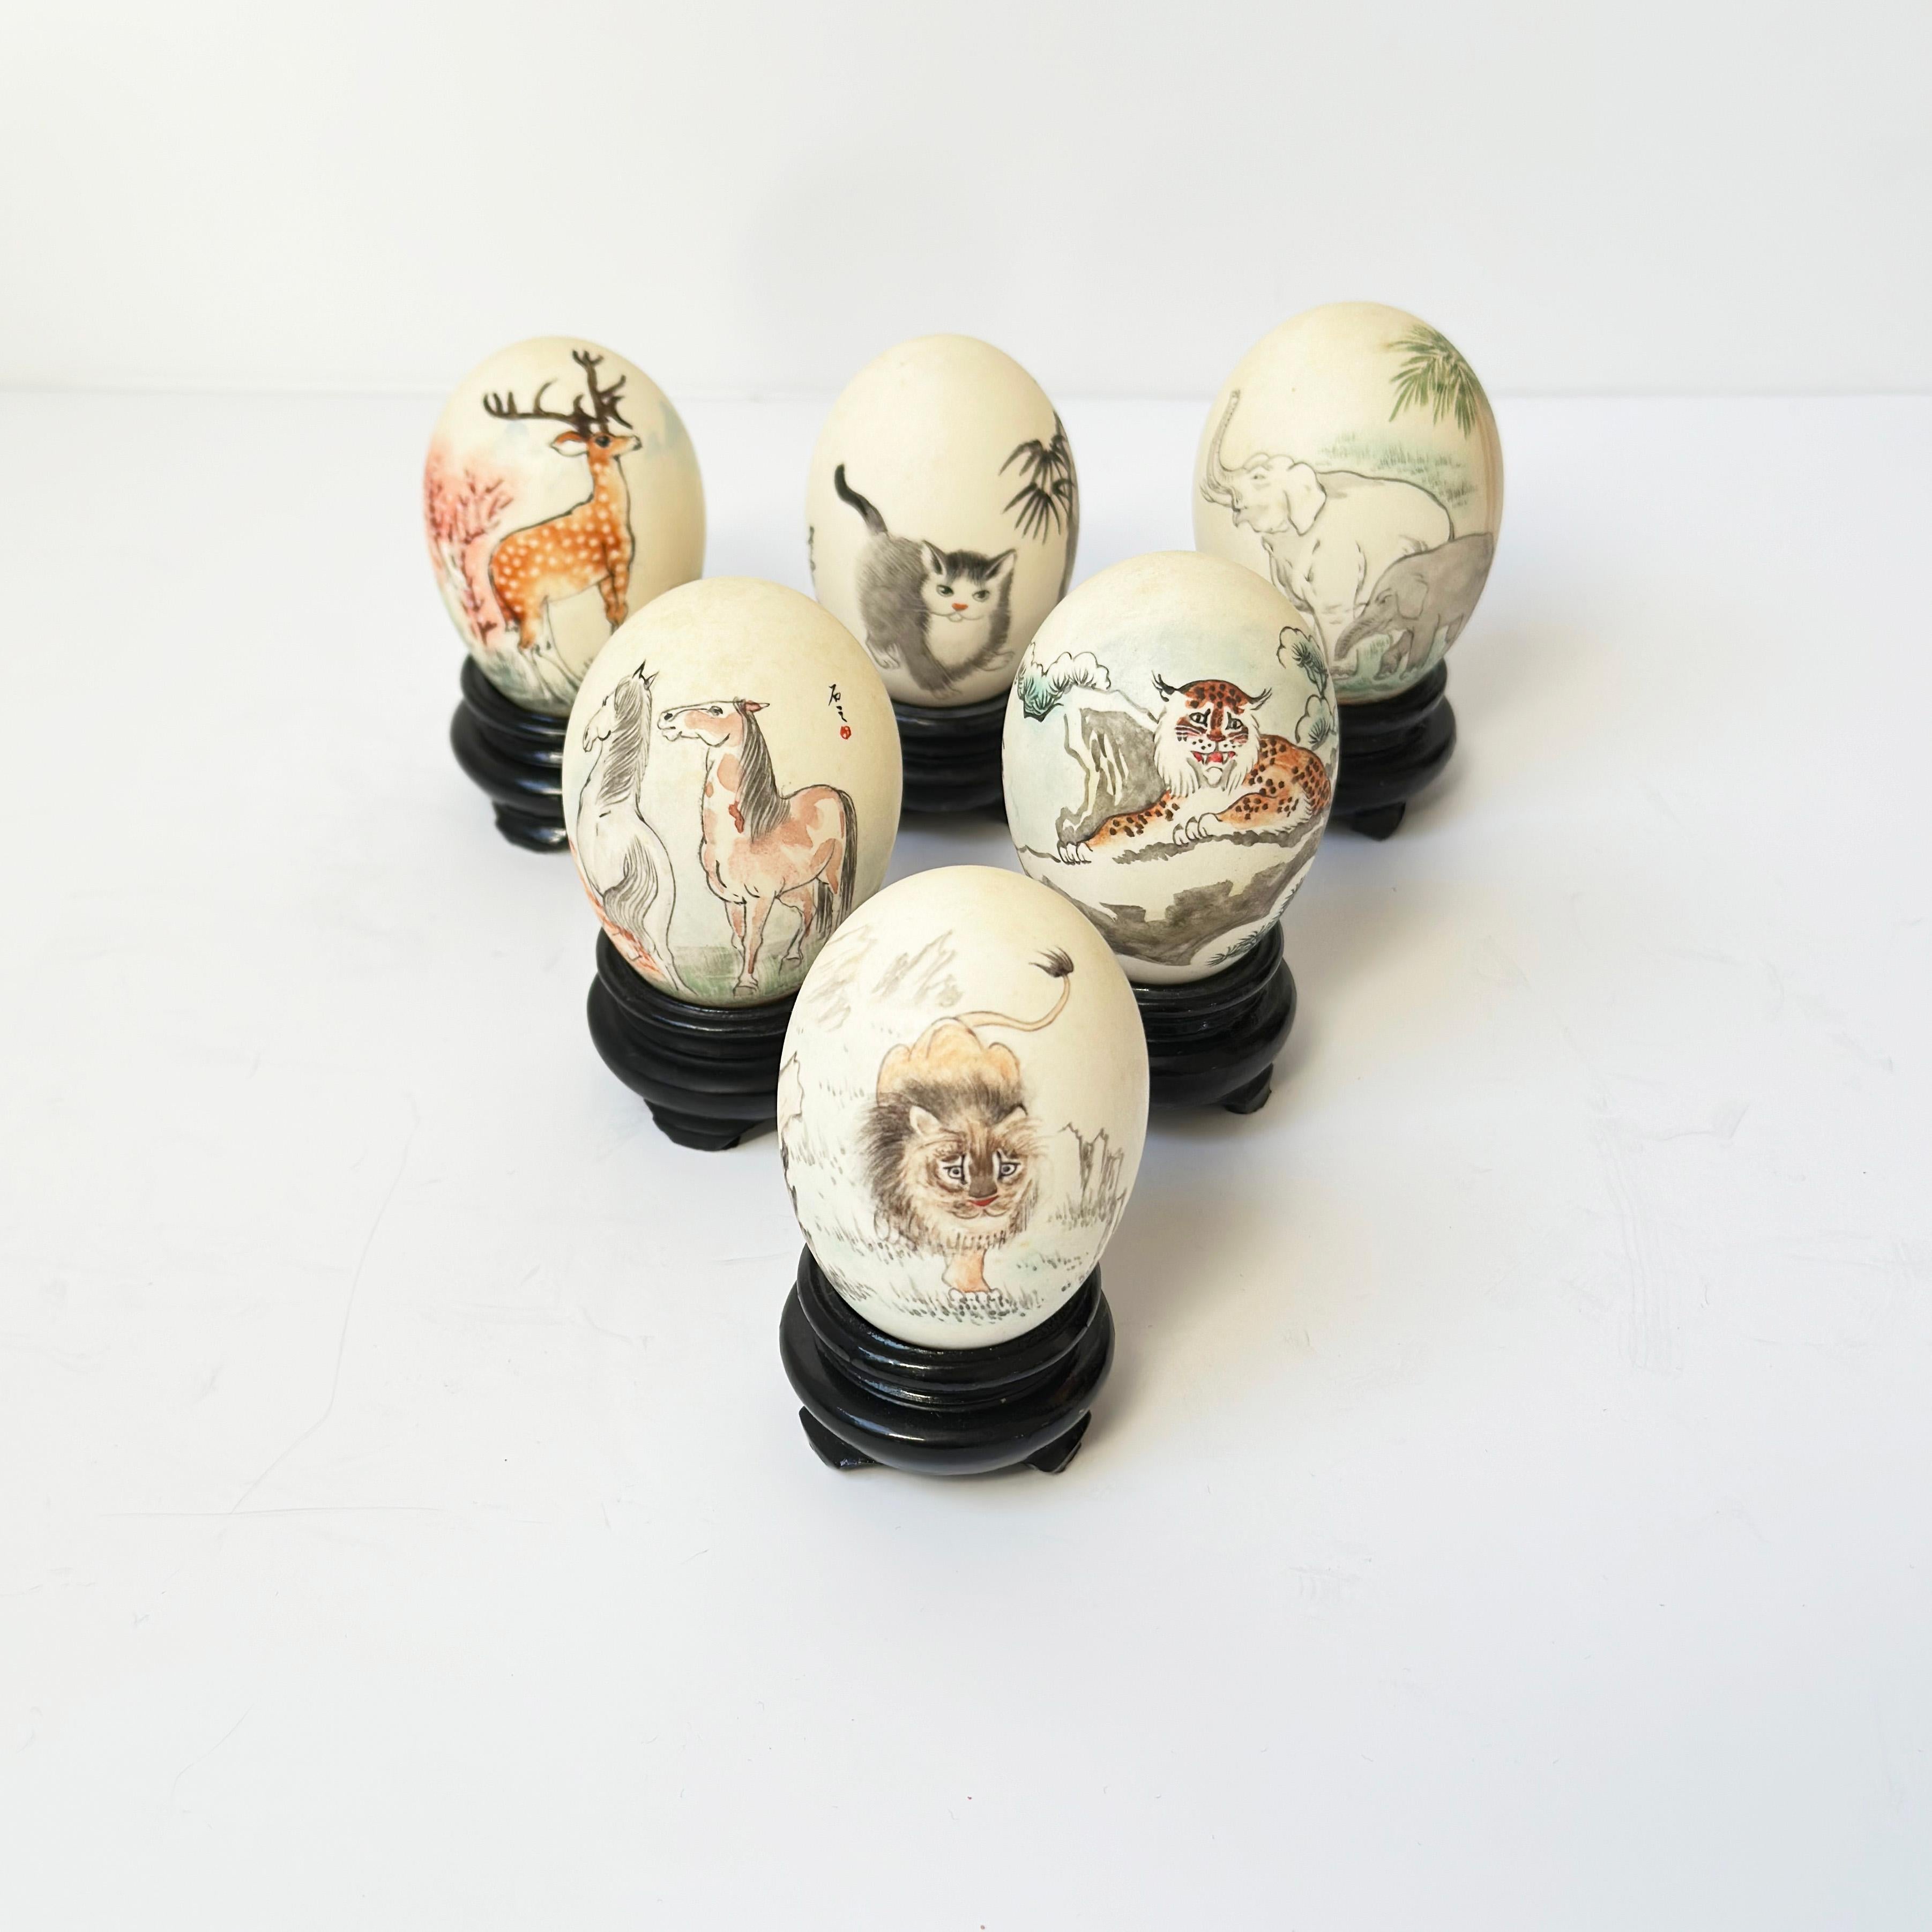 Late 20th Century Vintage Chinese Painted Eggshells on Wooden Display Plinths - Set of 6 For Sale